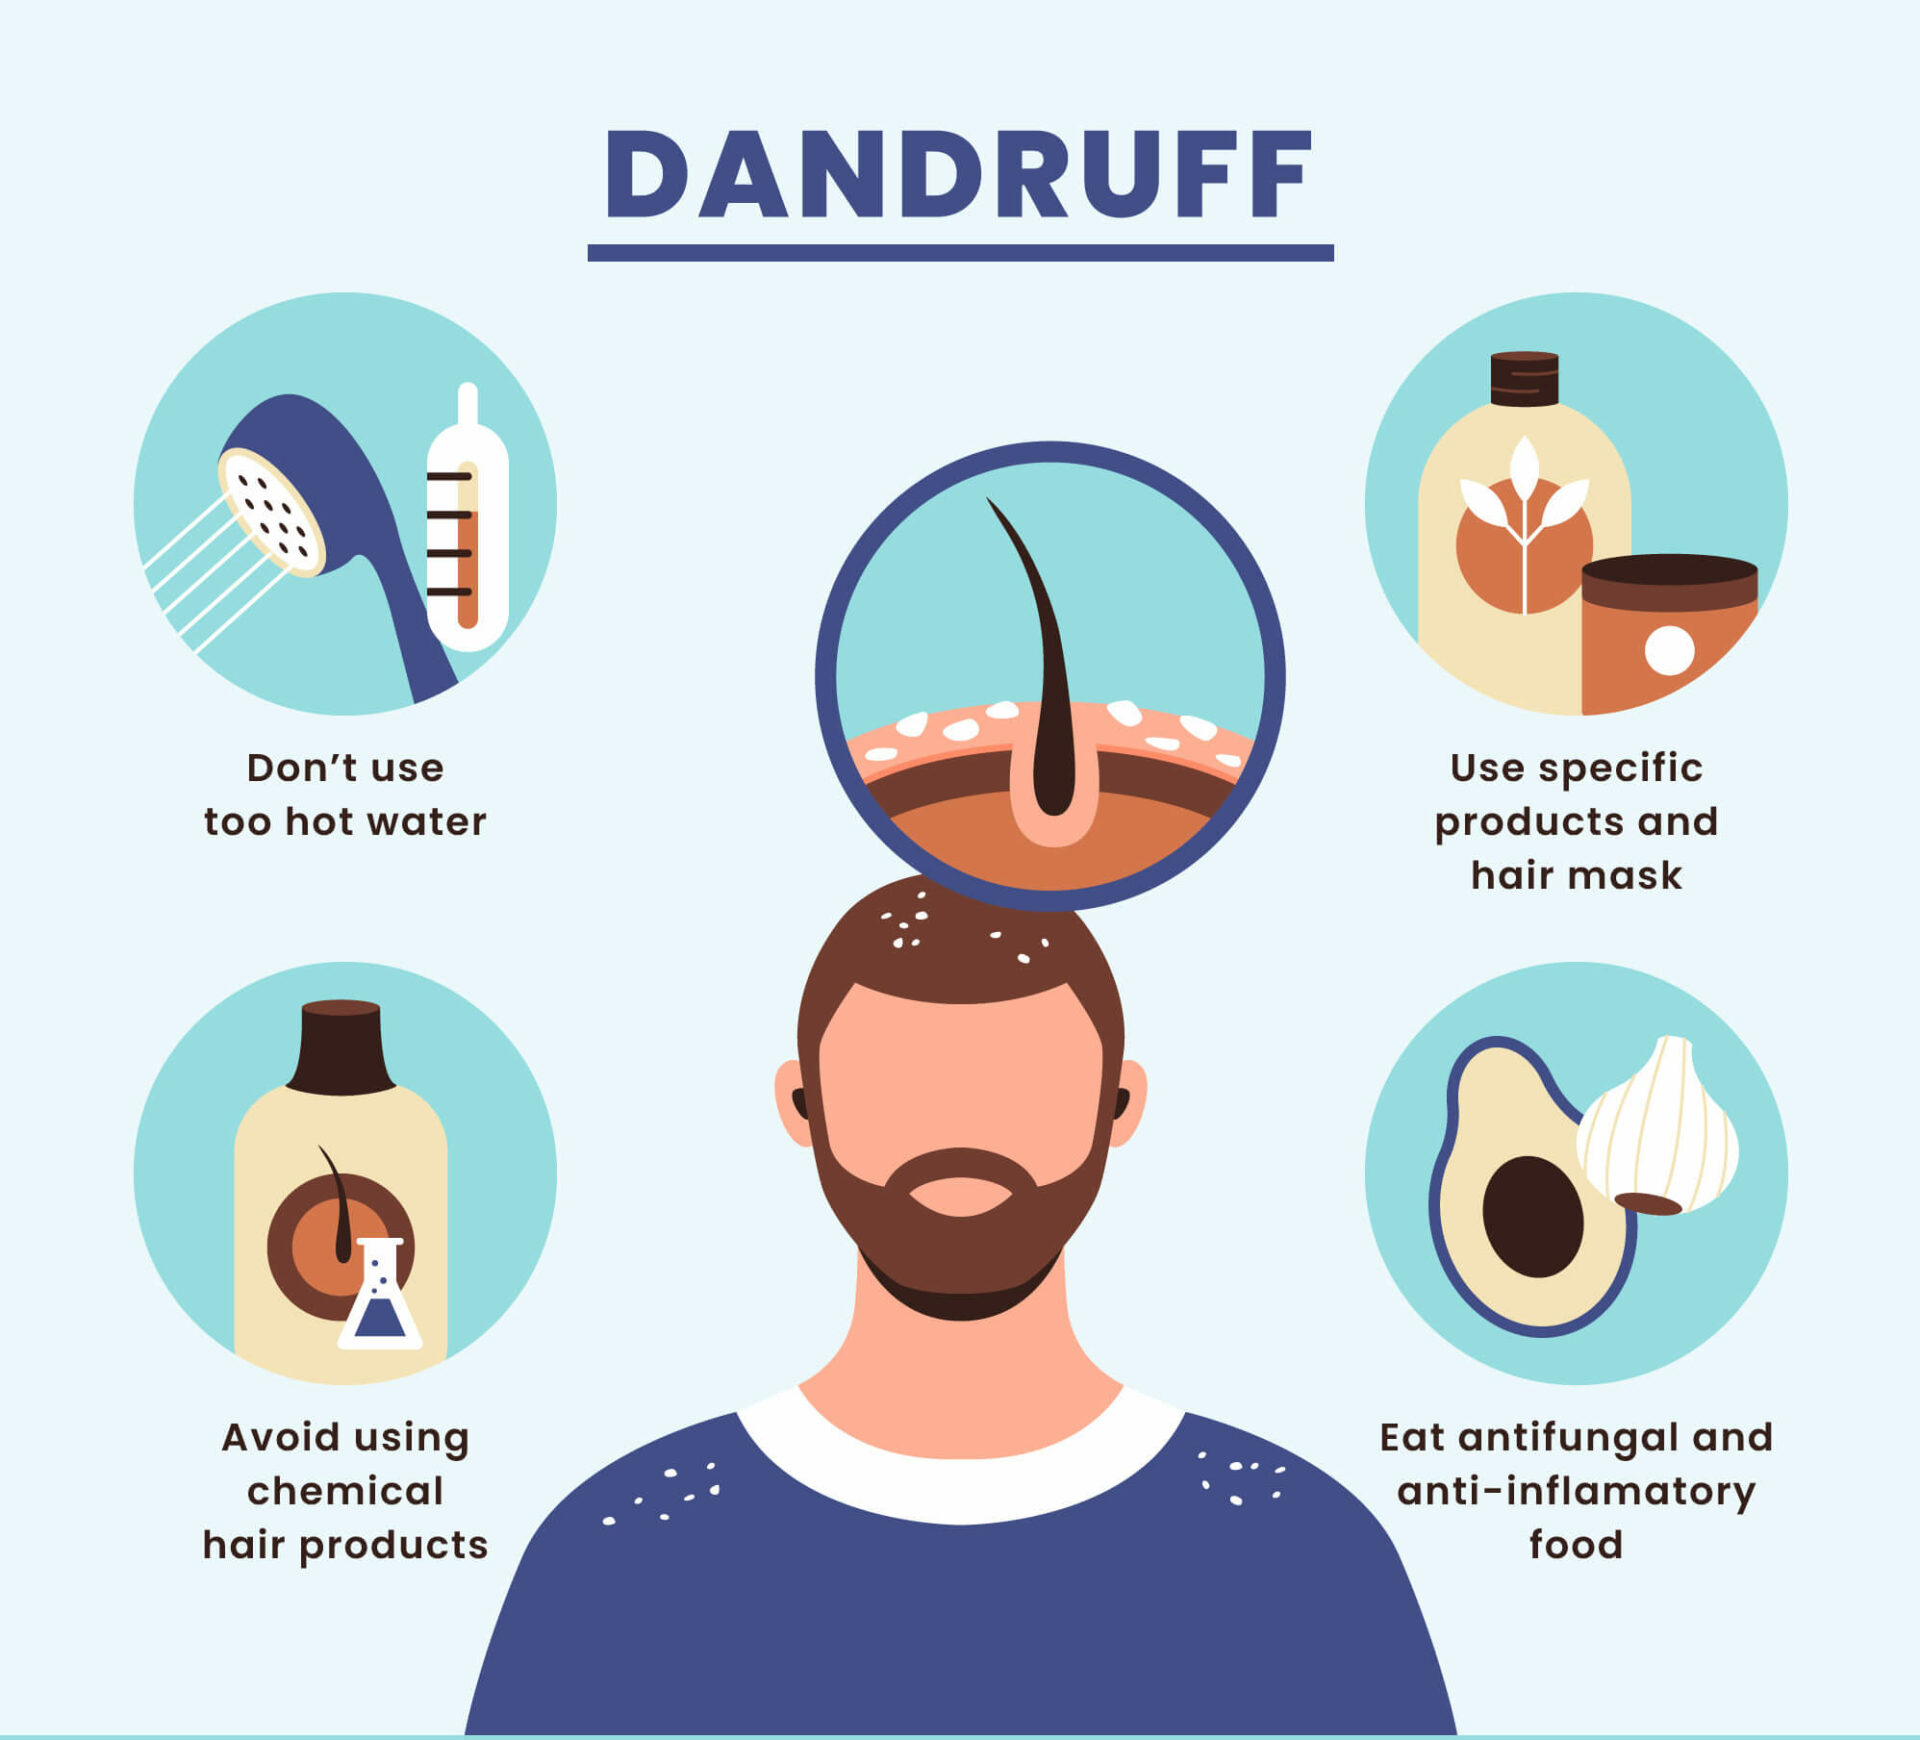 How to manage dandruff?